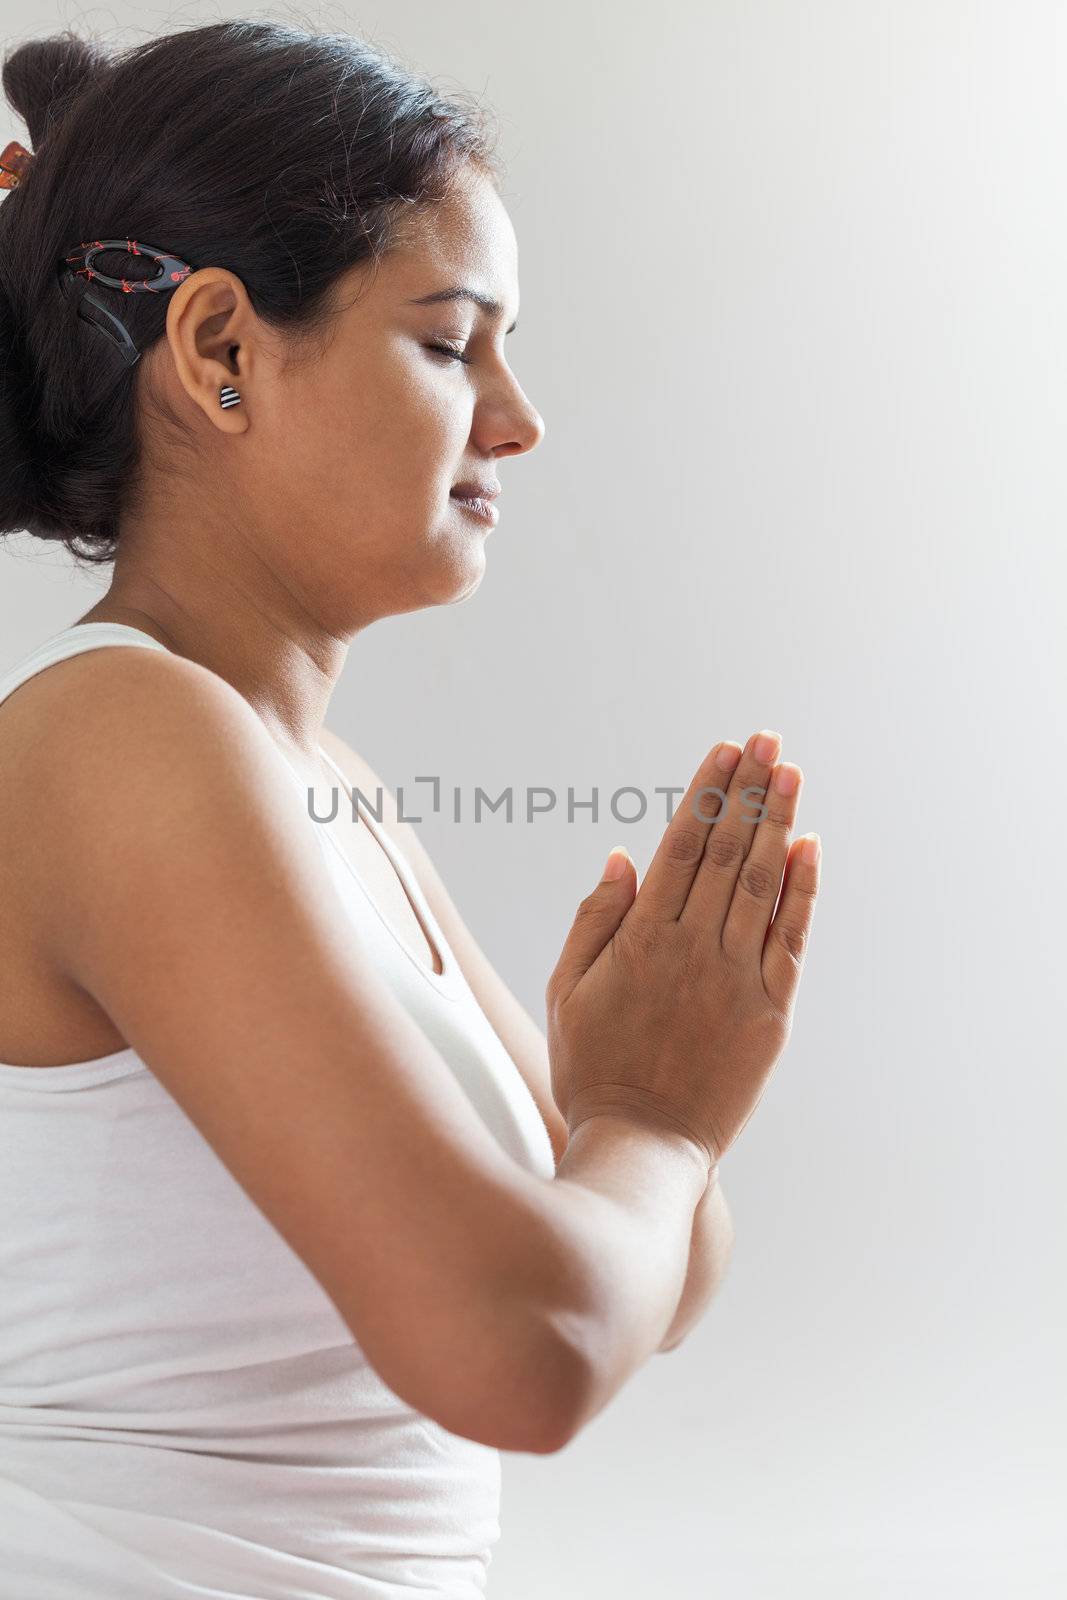 A beautiful Young Indian girl in white top doing meditation by joining hands